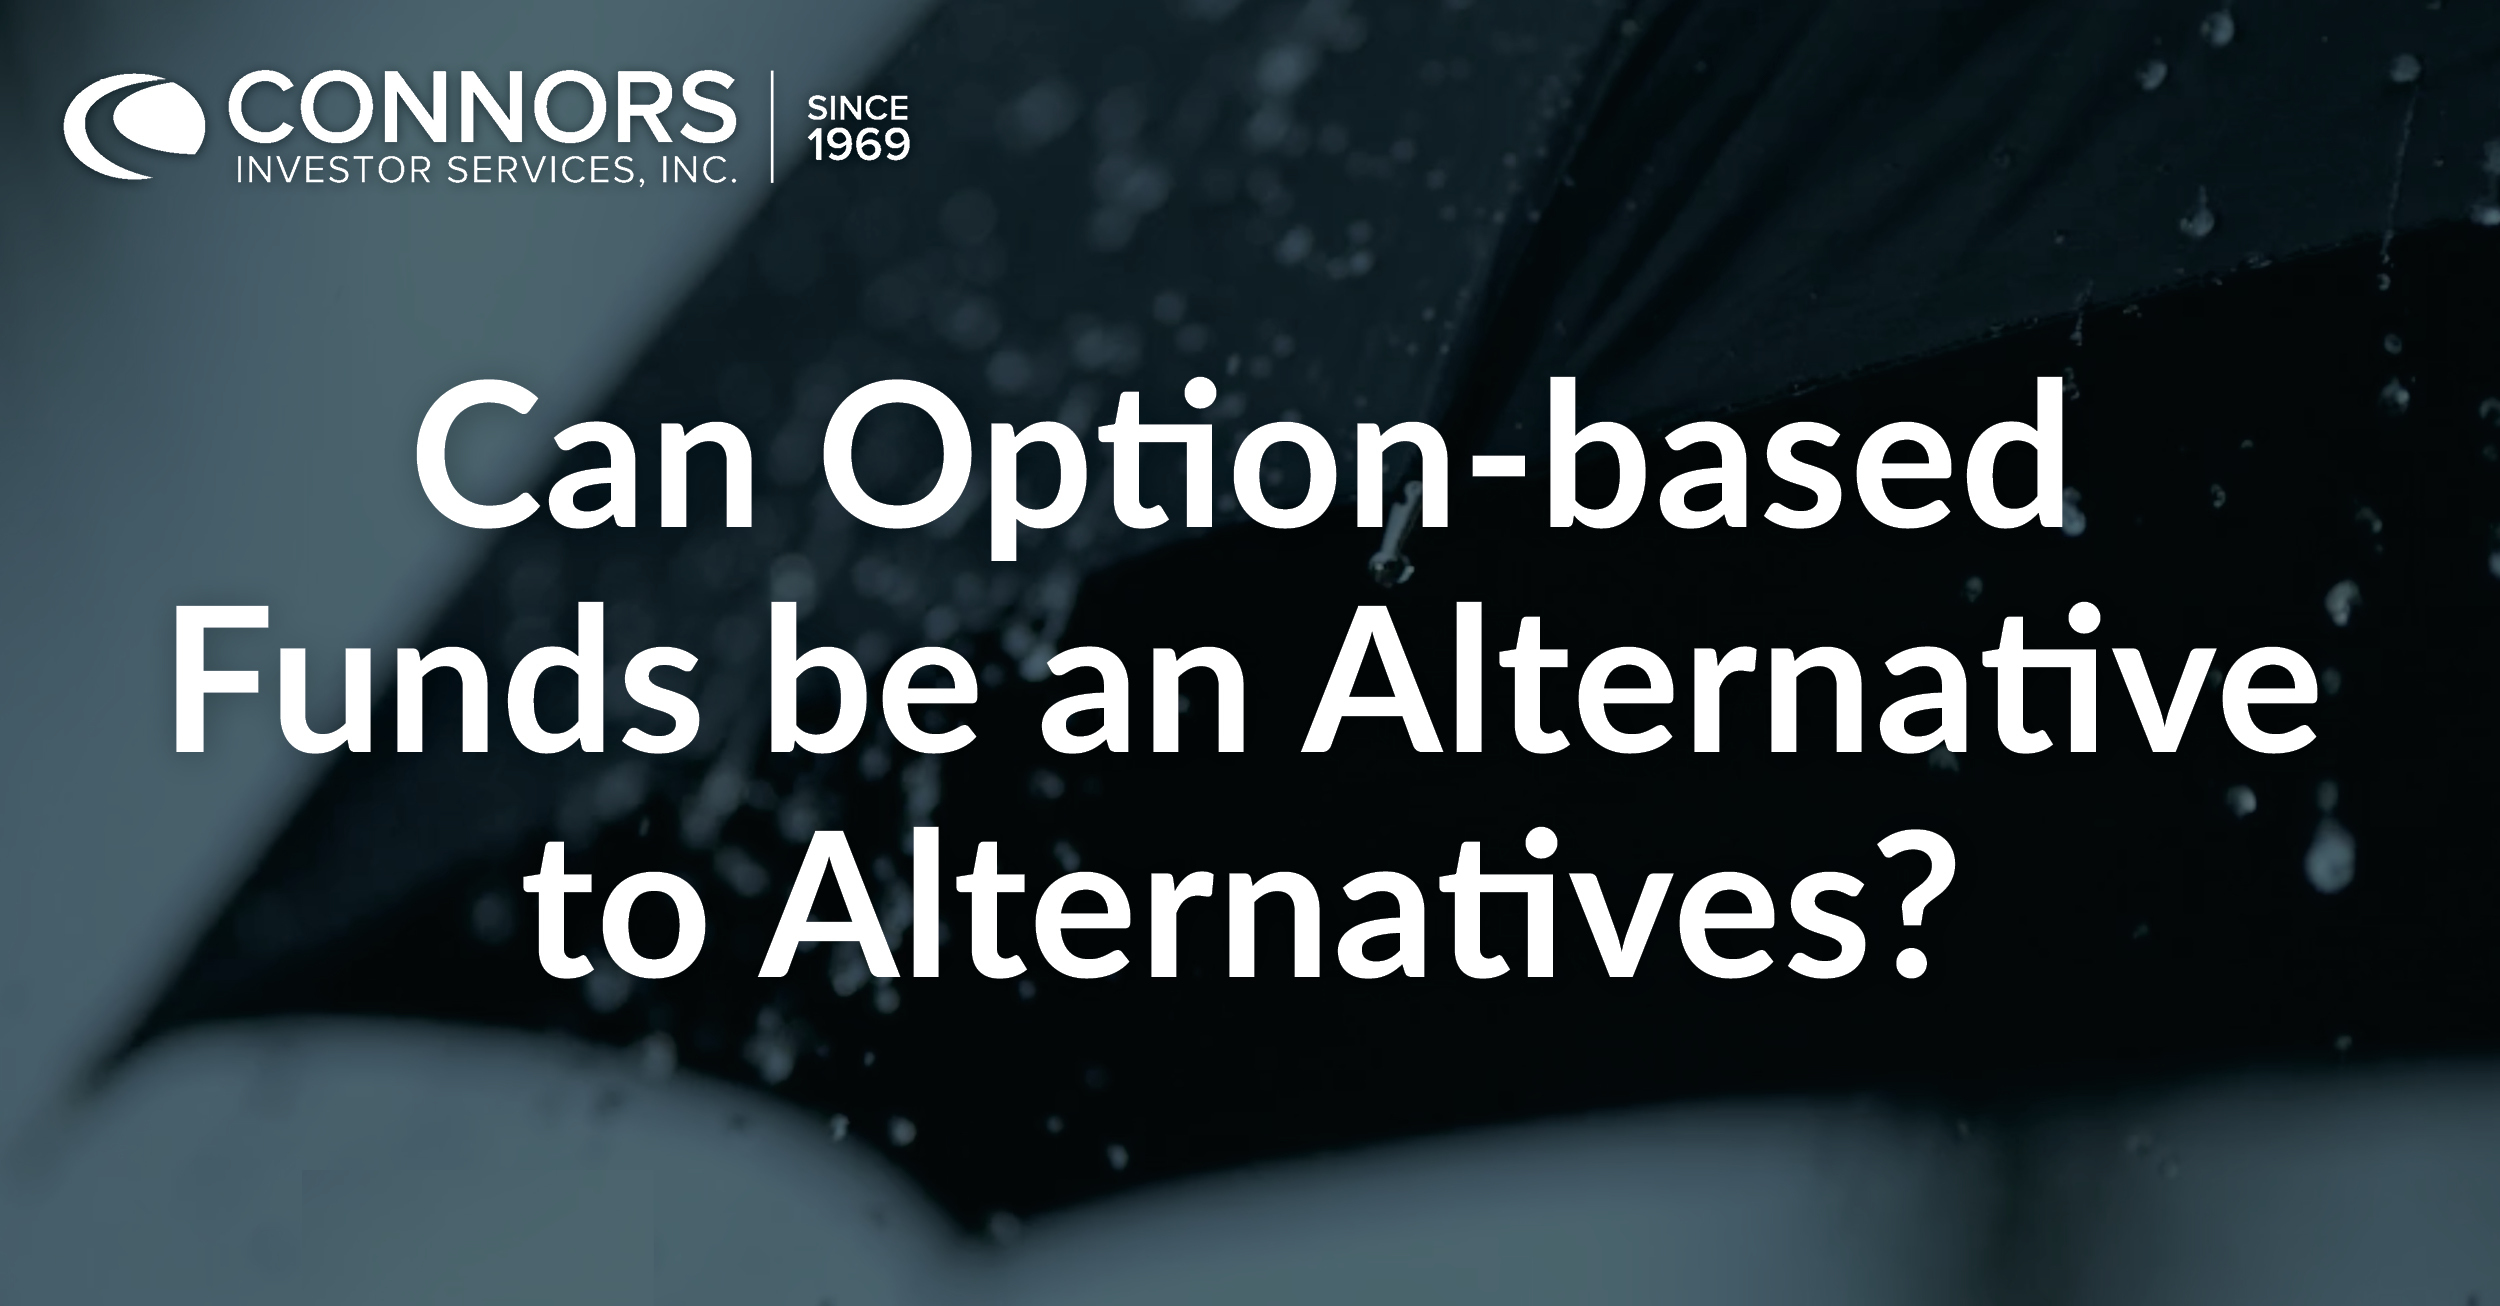 Can Option-based Funds be an Alternative to Alternatives?